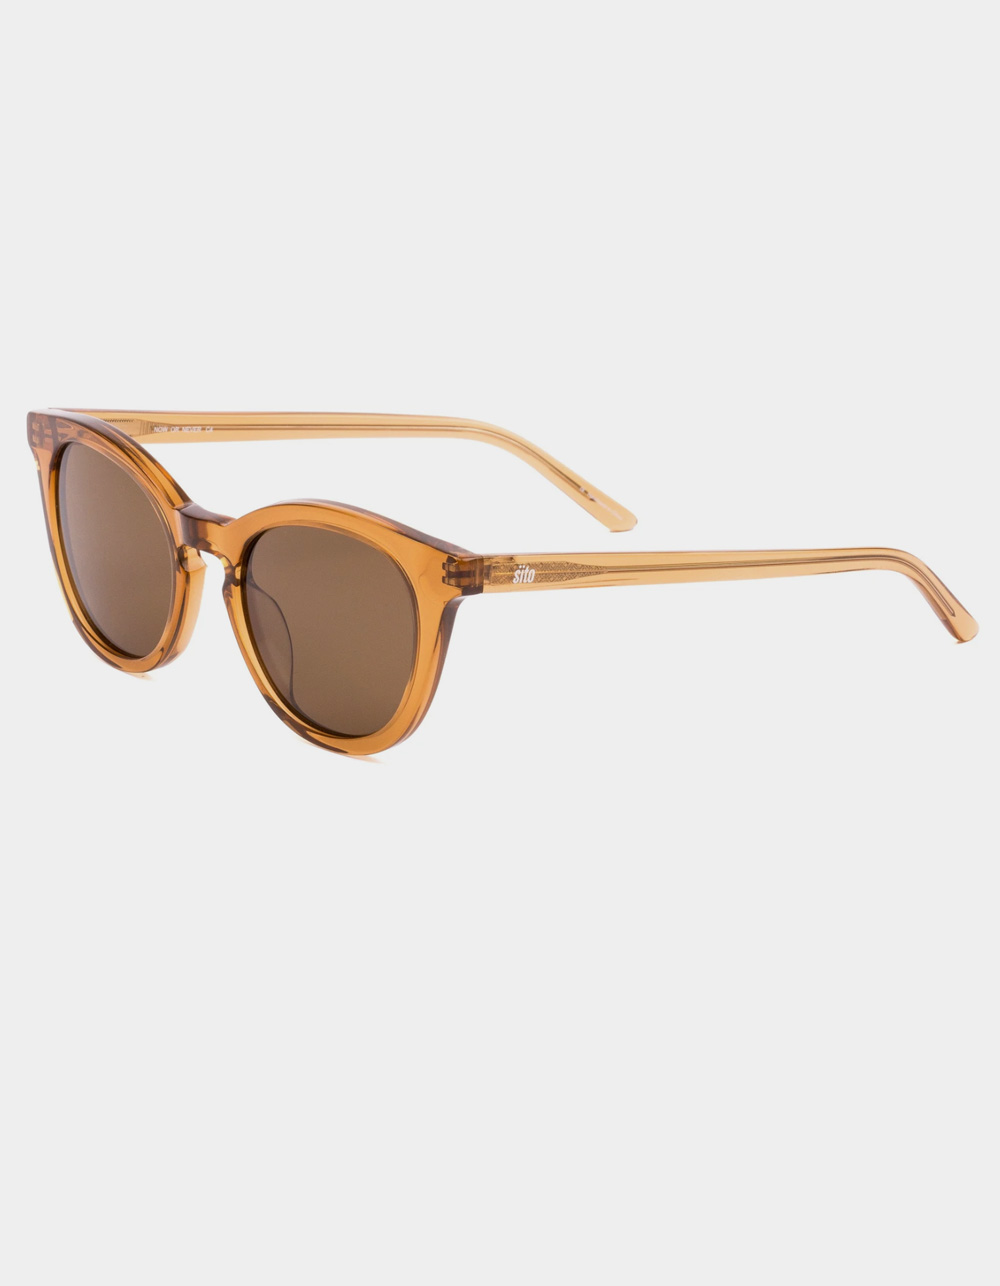 SITO Now Or Never Round Sunglasses - TOBACCO | Tillys